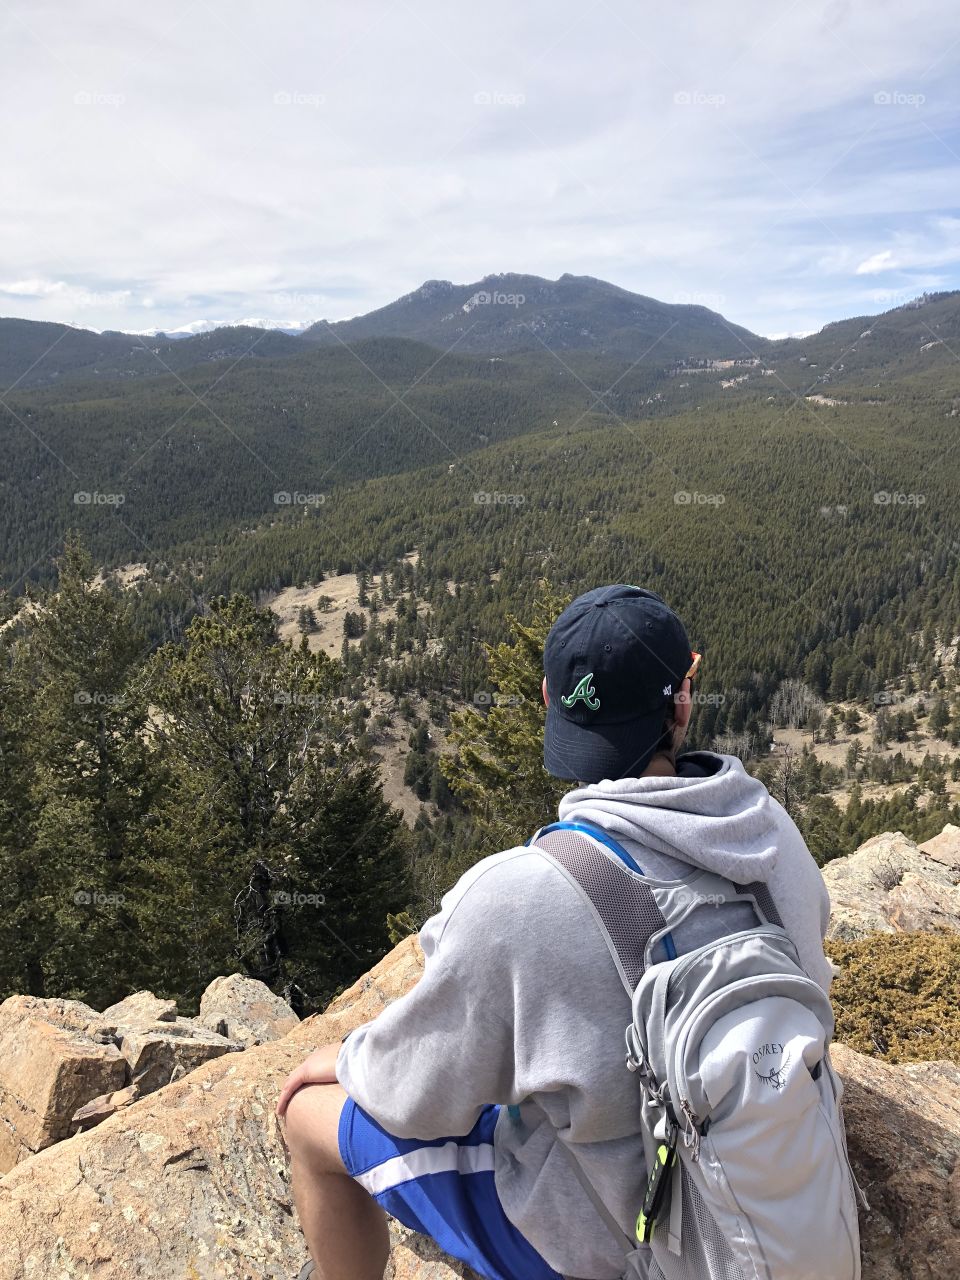 Beautiful day hike to a peak that looks directly over a valley with the Rocky Mountains in the background. Here I am relaxing after reaching the top